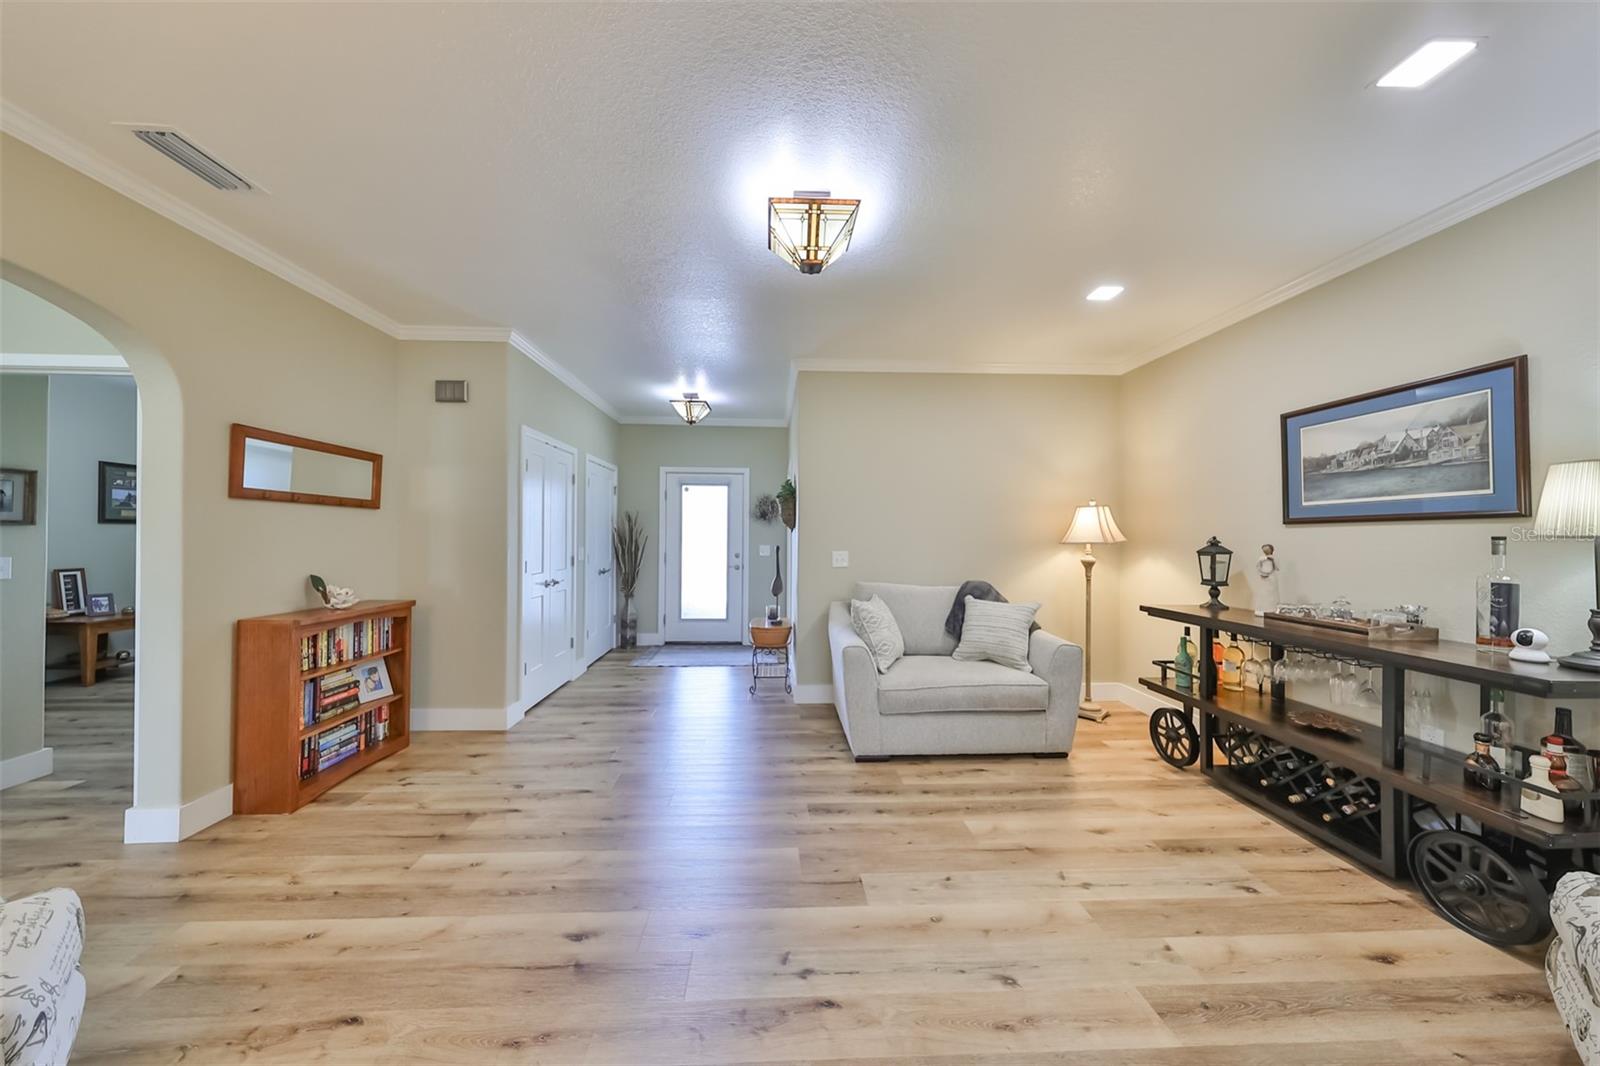 The front foyer/den has crown molding, large closets, natural colored laminate flooring and custom light fixtures.